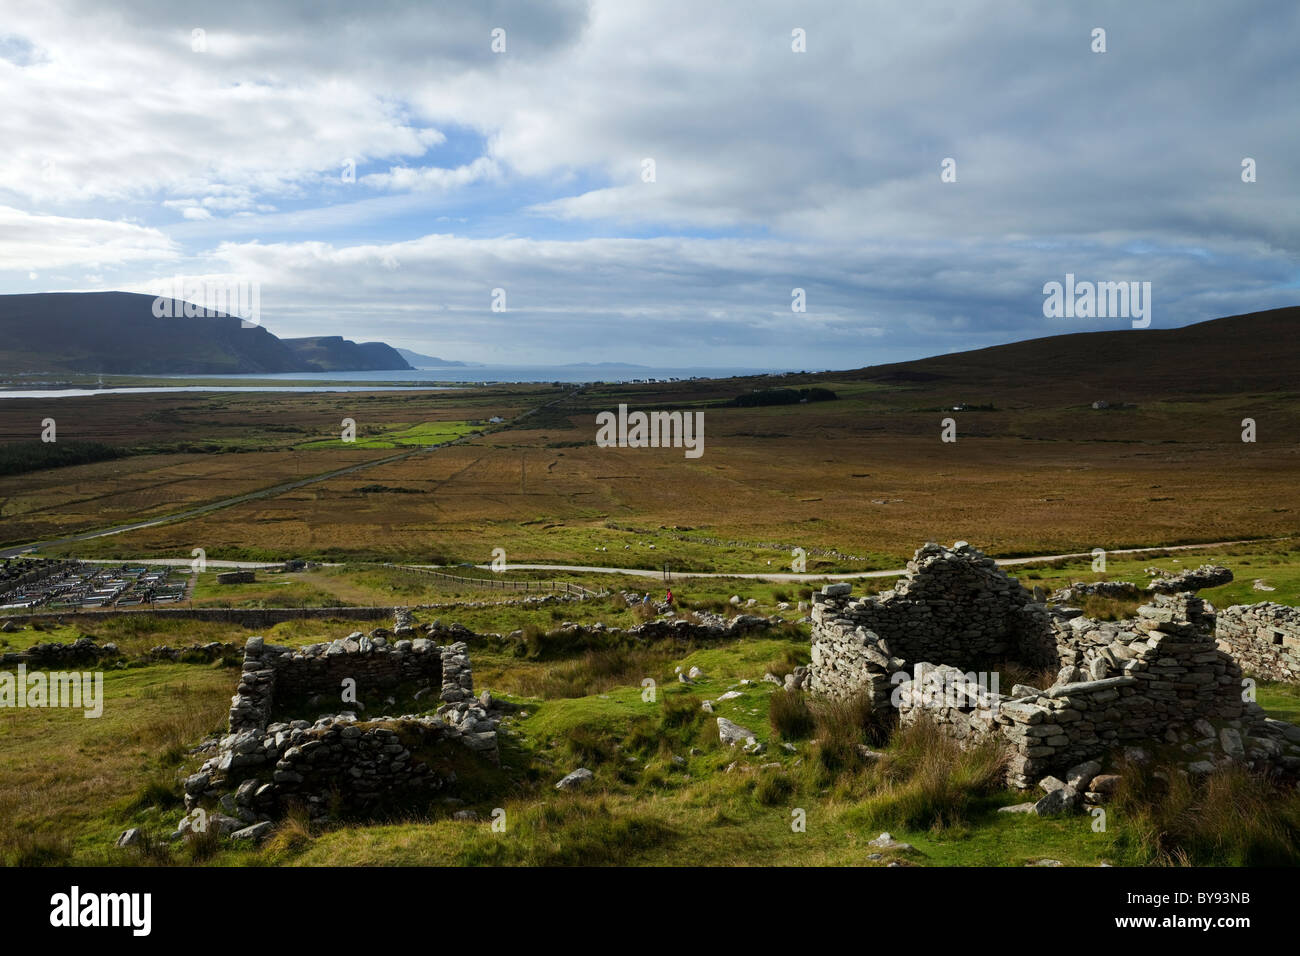 The Missionary Settlement - or Deserted Village, On the slopes of Slievemore, Achill Island, County Mayo, Ireland Stock Photo